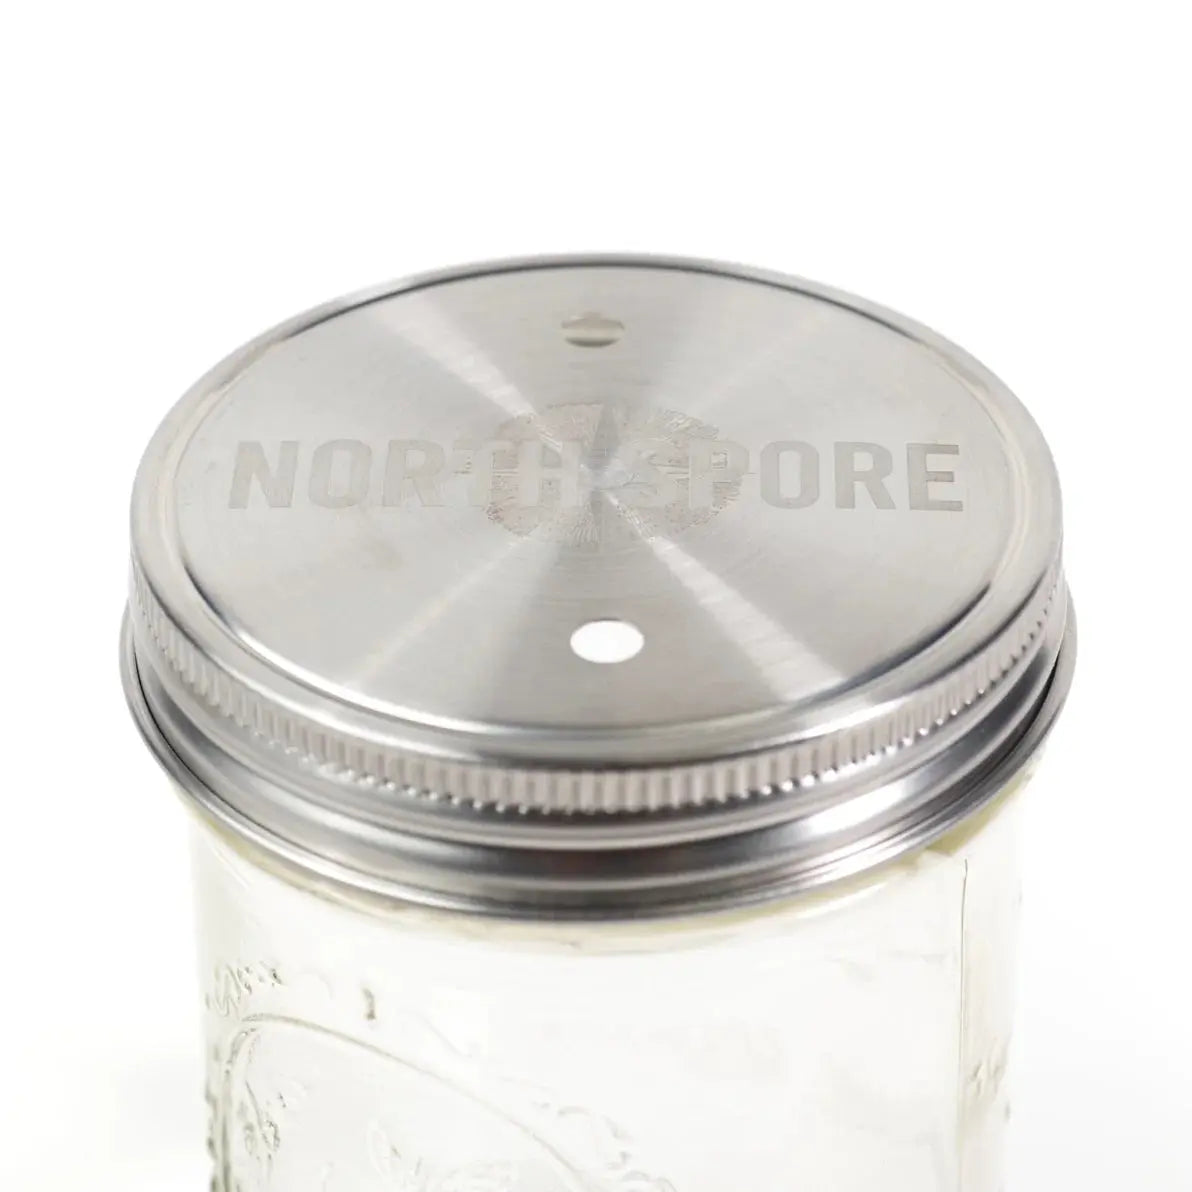 NORTH SPORE 'Wide Mouth' Culture Jar Lid with Port & Filter | Pack of 6